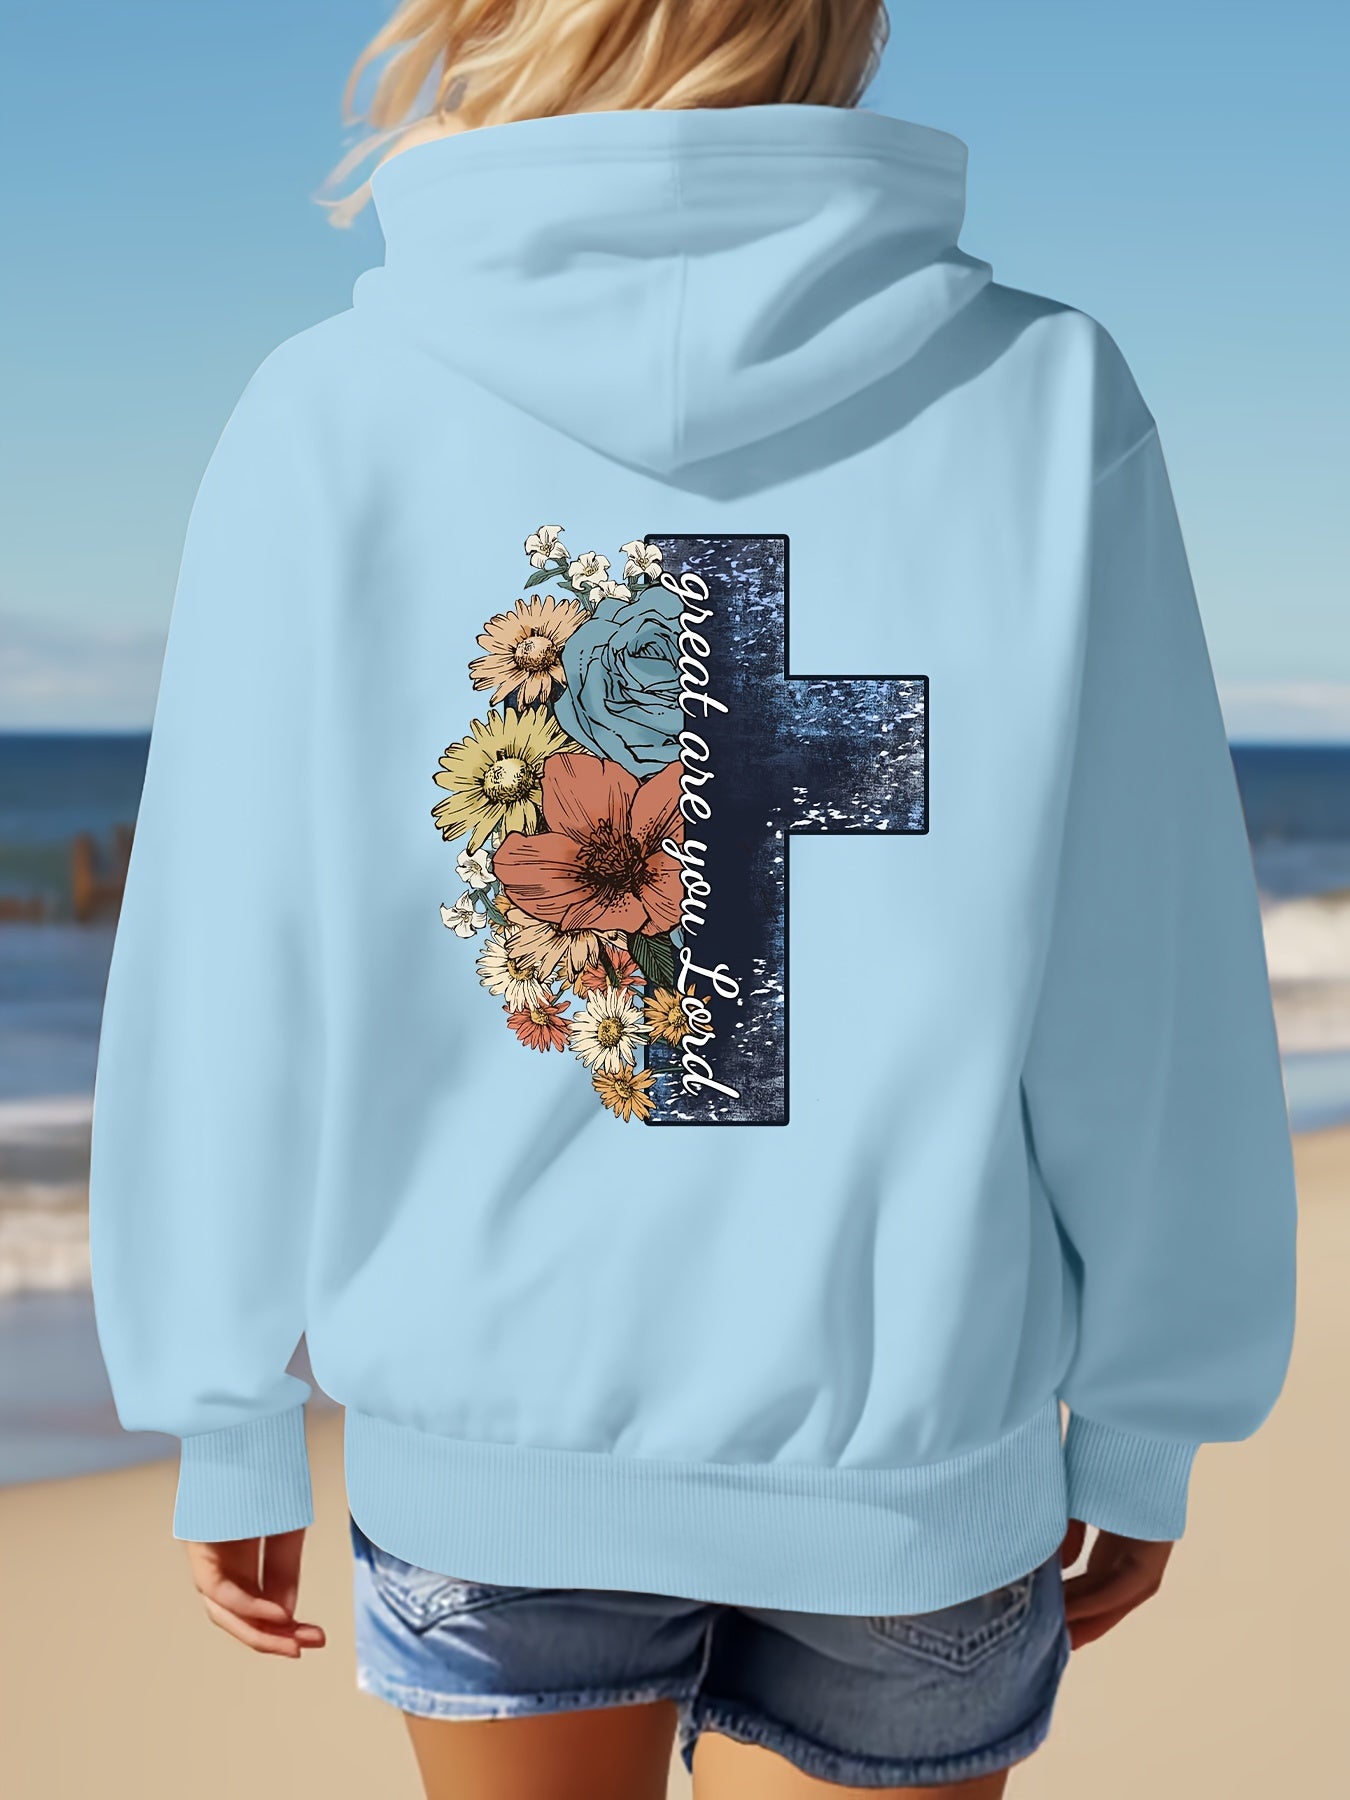 Great Are You Lord (Floral Cross) Women's Christian Pullover Hooded Sweatshirt claimedbygoddesigns